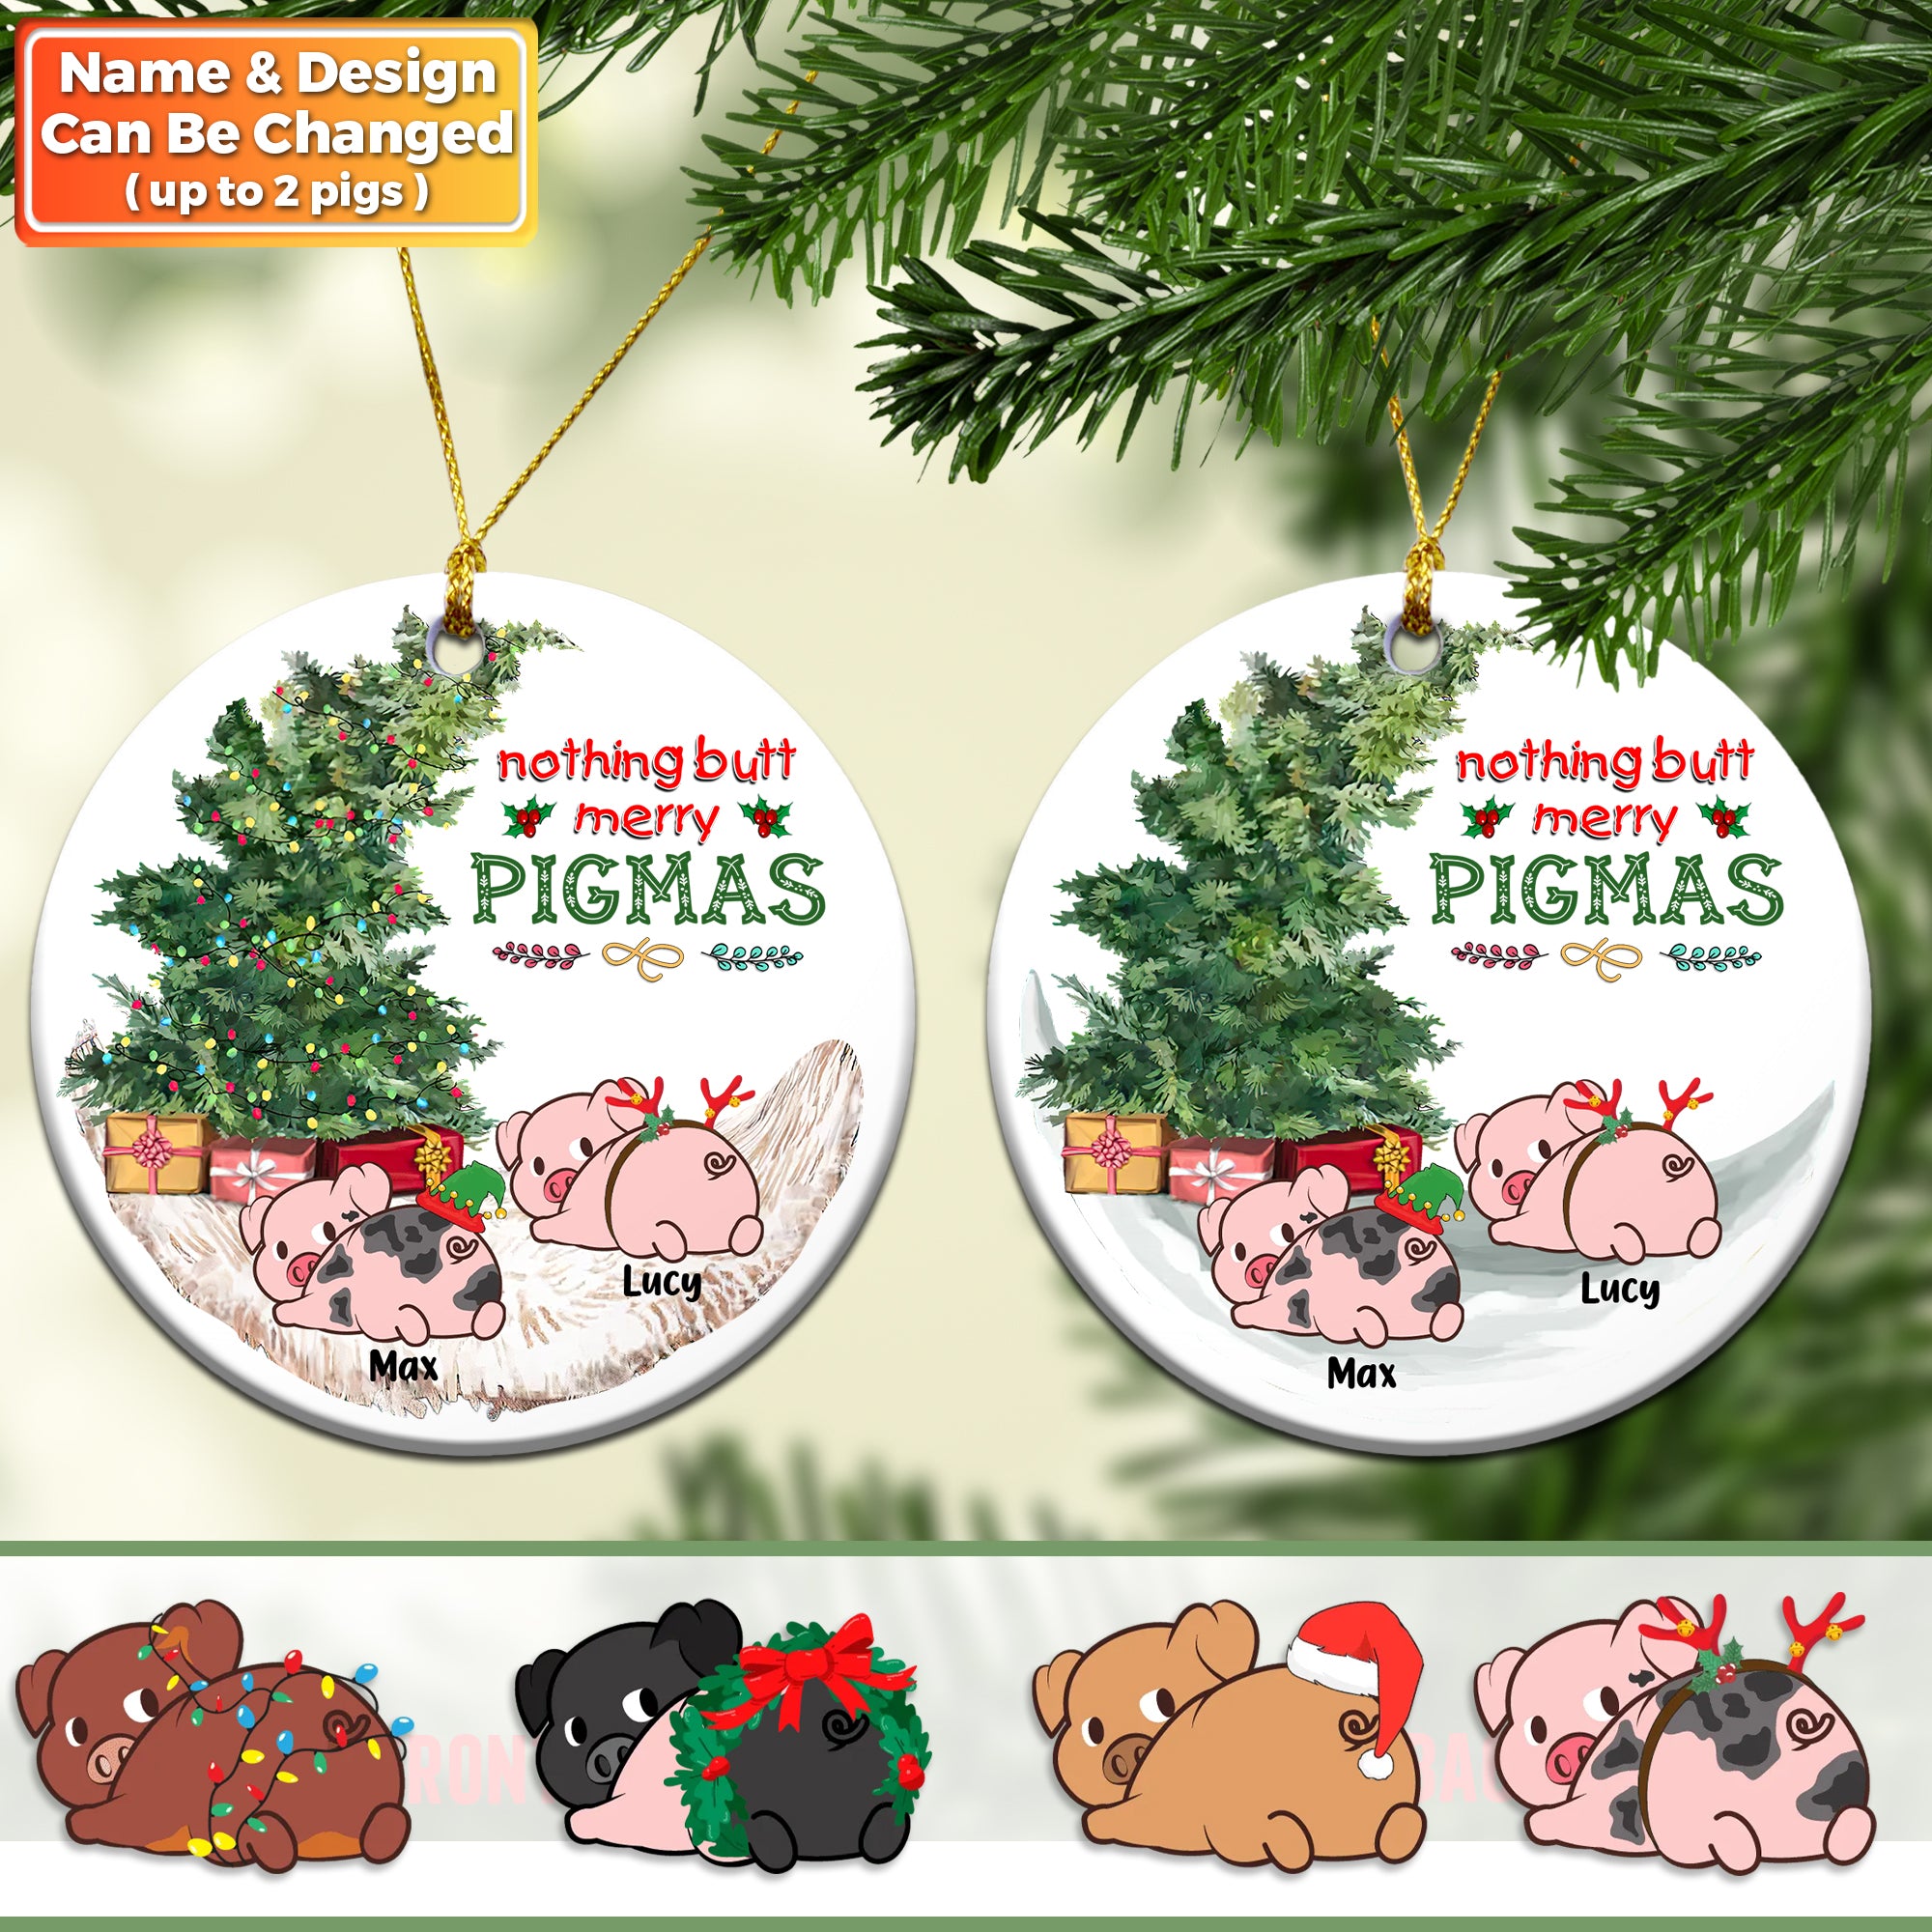 Merry Pigmas Pigs Personalized Circle Ornament - Merry Christmas